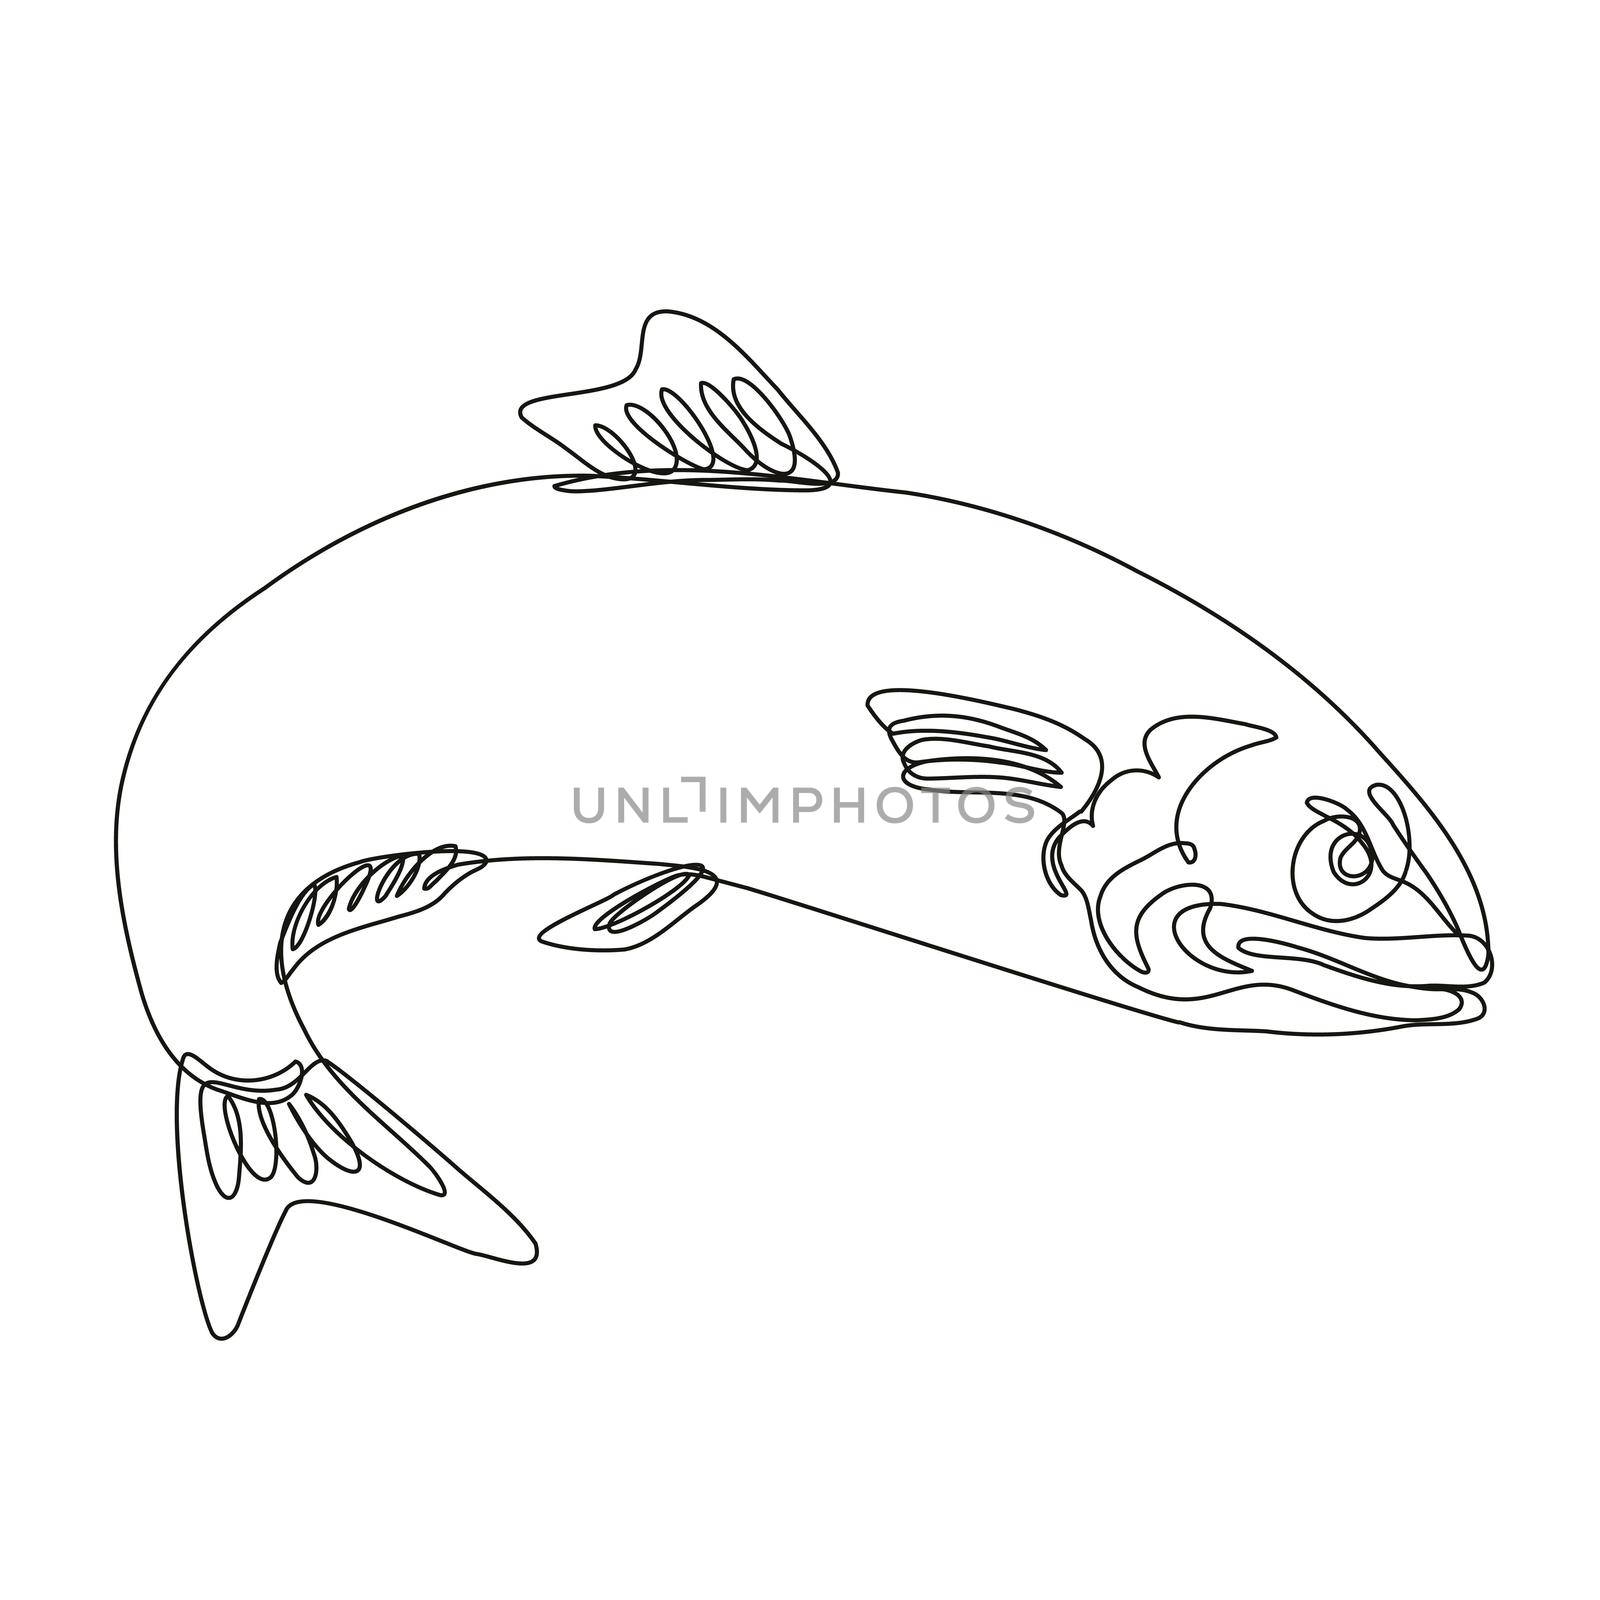 Continuous line drawing illustration of an angry Atlantic herring sardine fish jumping done in mono line or doodle style in black and white on isolated background. 